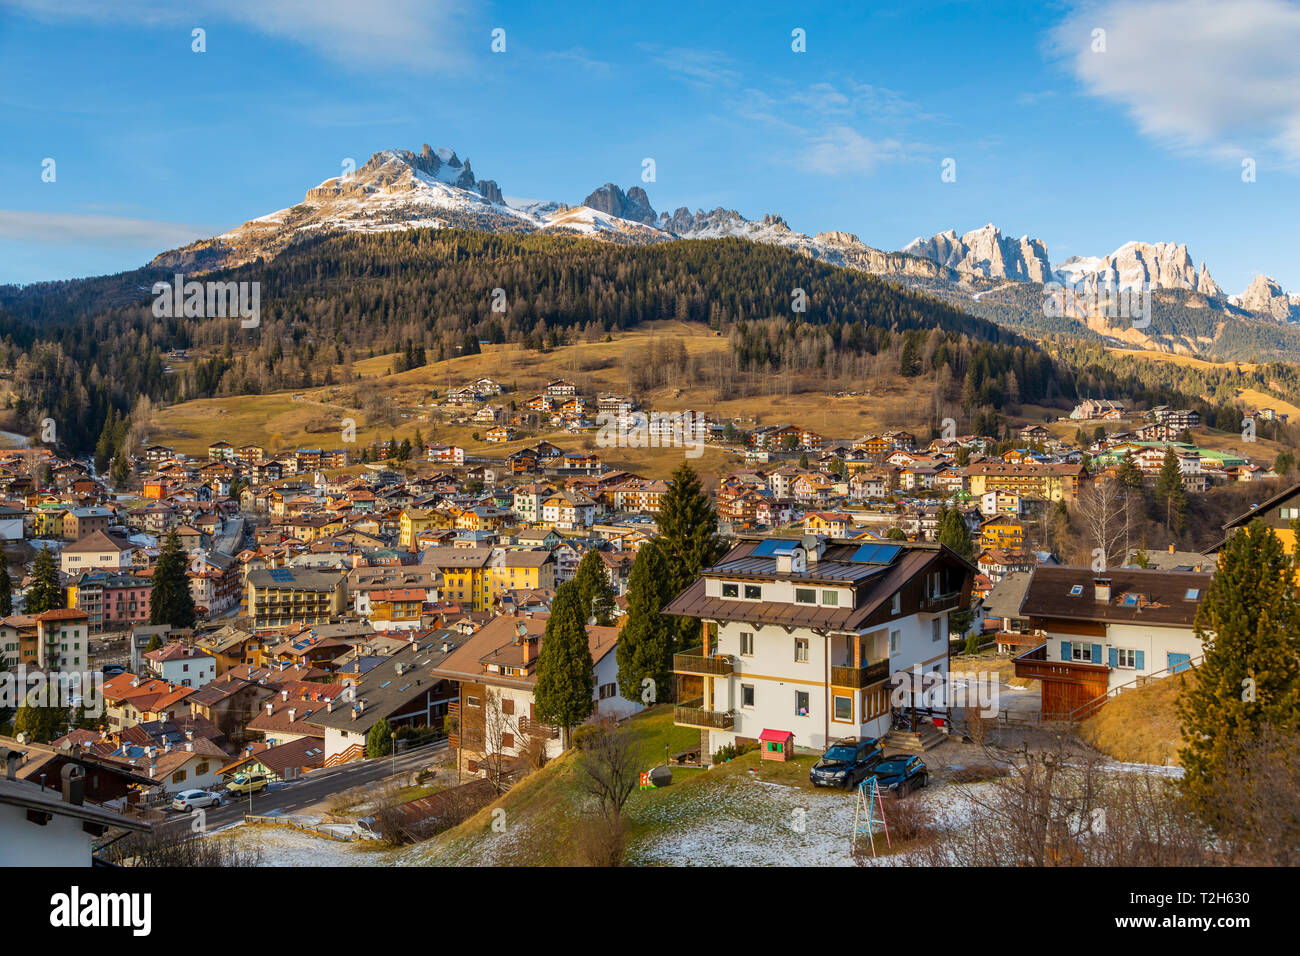 Town of Moena in Italy, Europe Stock Photo